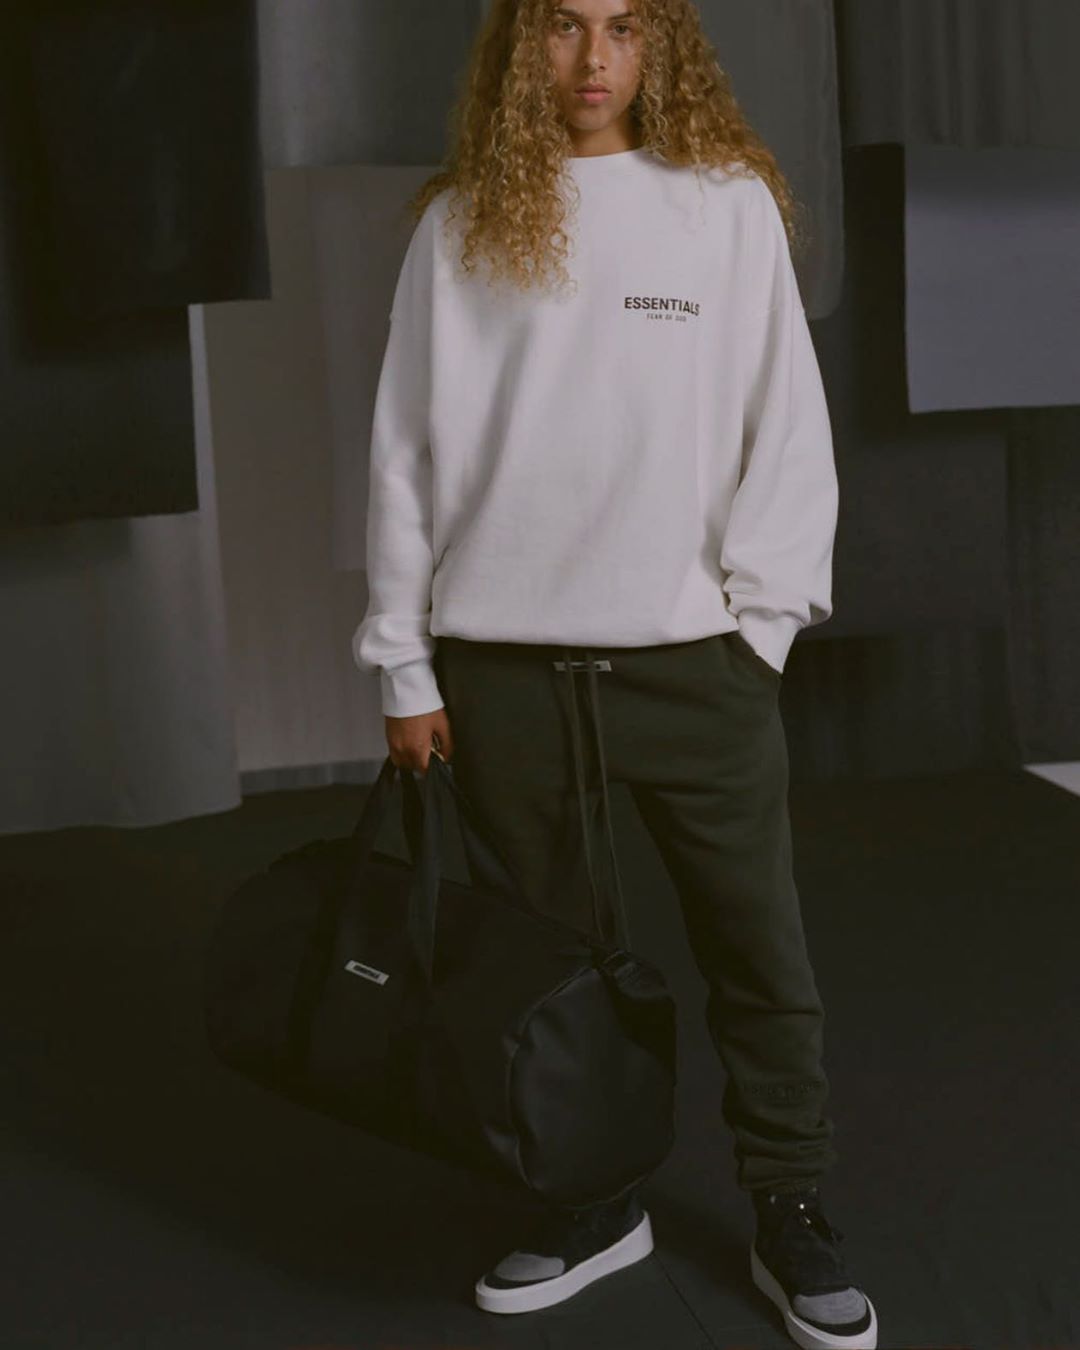 fear-of-god-essentials-19-autumn-collection-lookbook